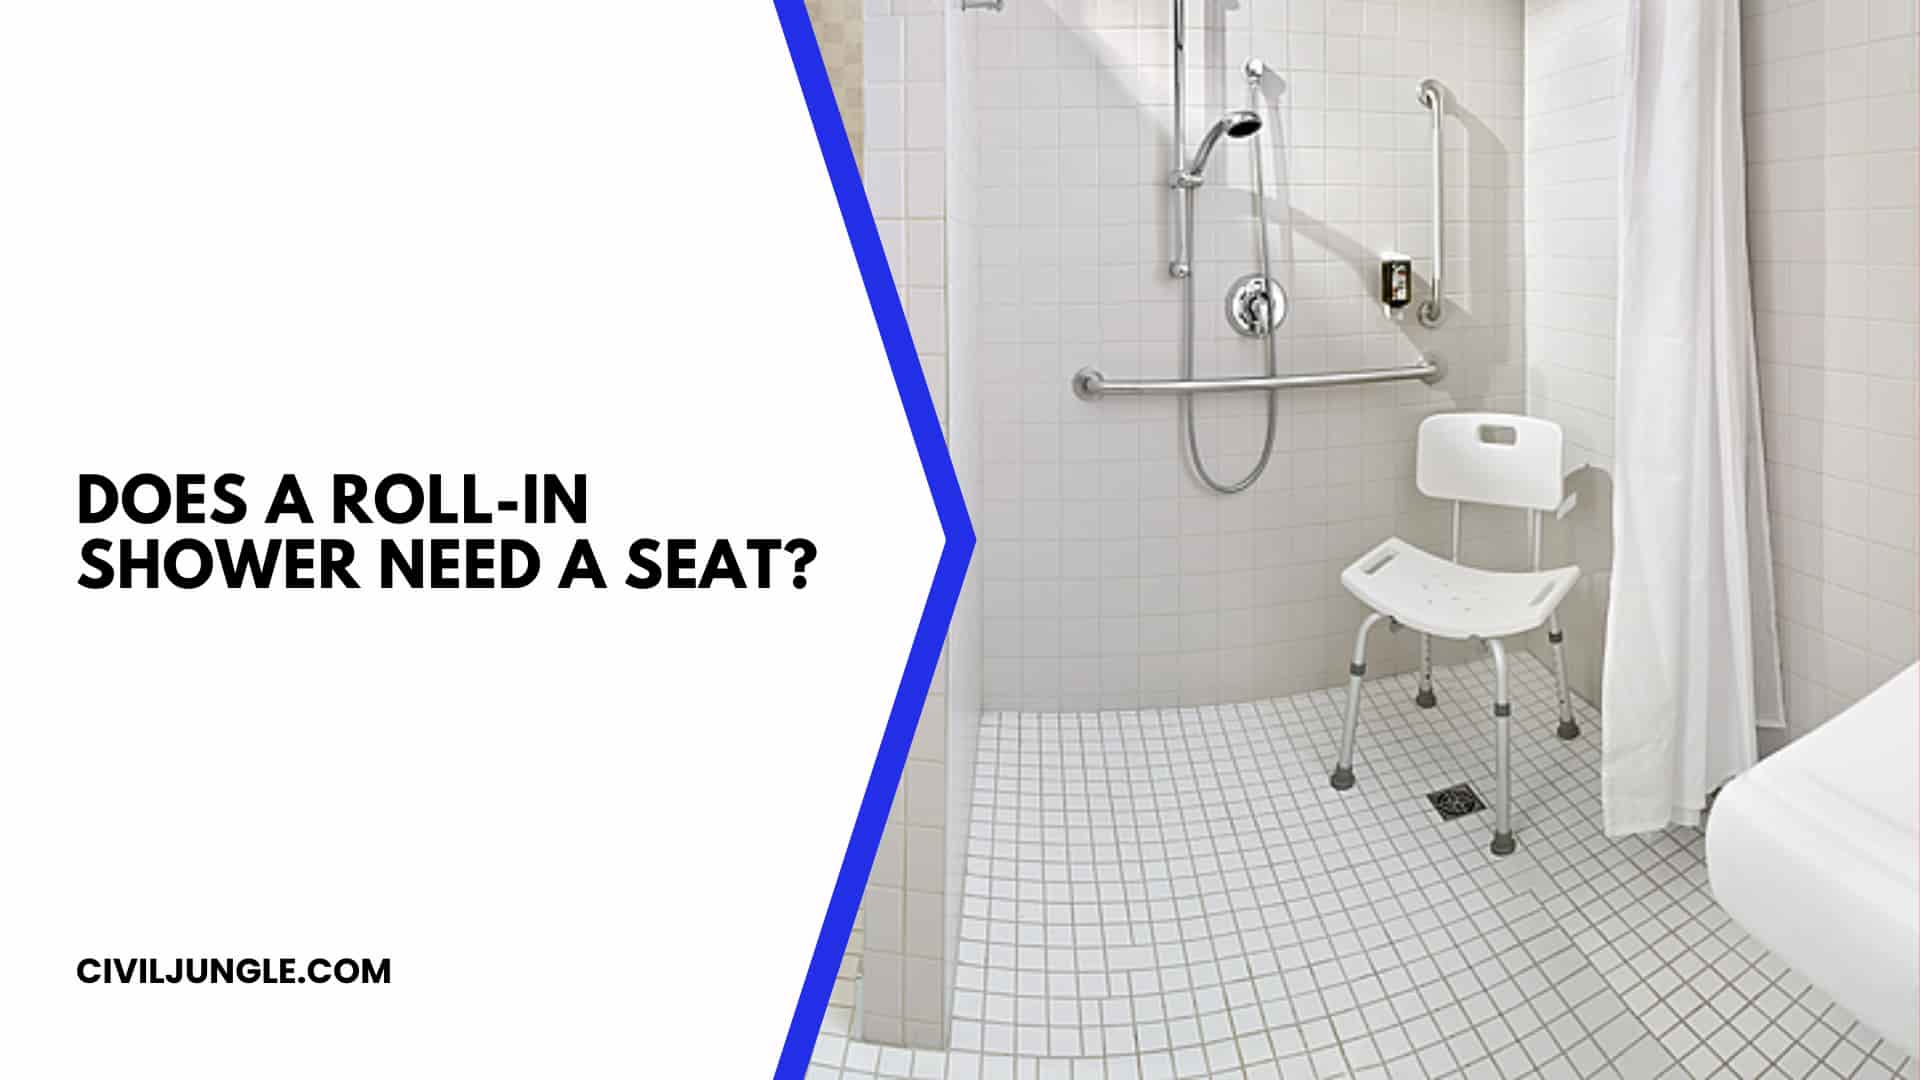 Does a Roll-in Shower Need a Seat?